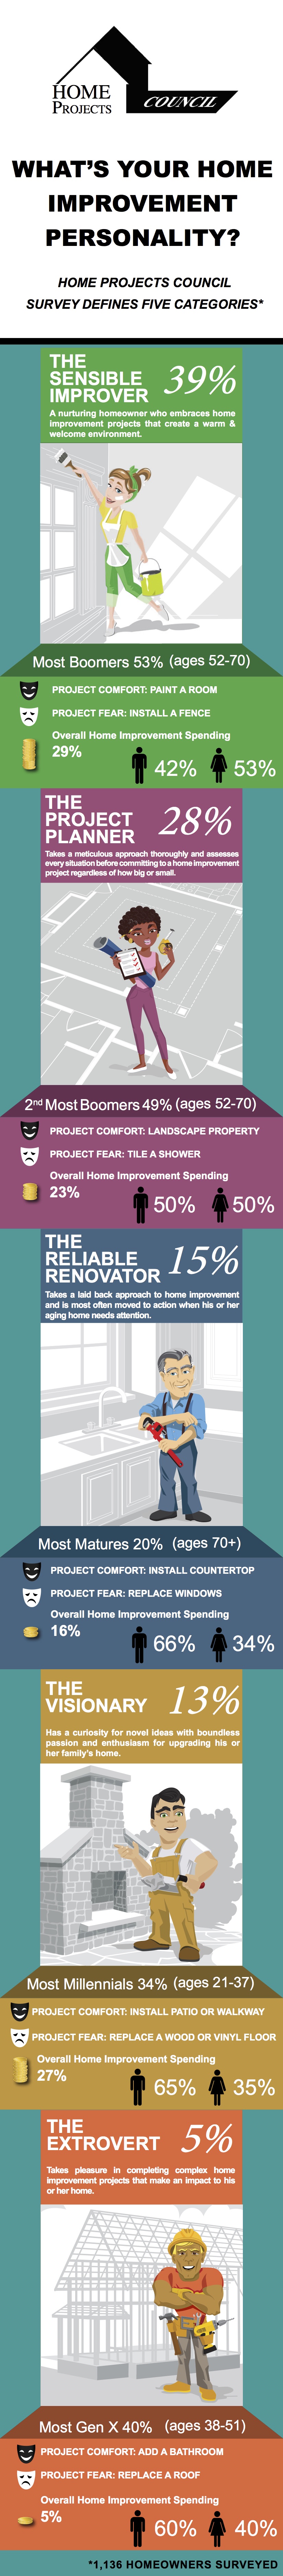 Which Remodeling Personality Type Are You?